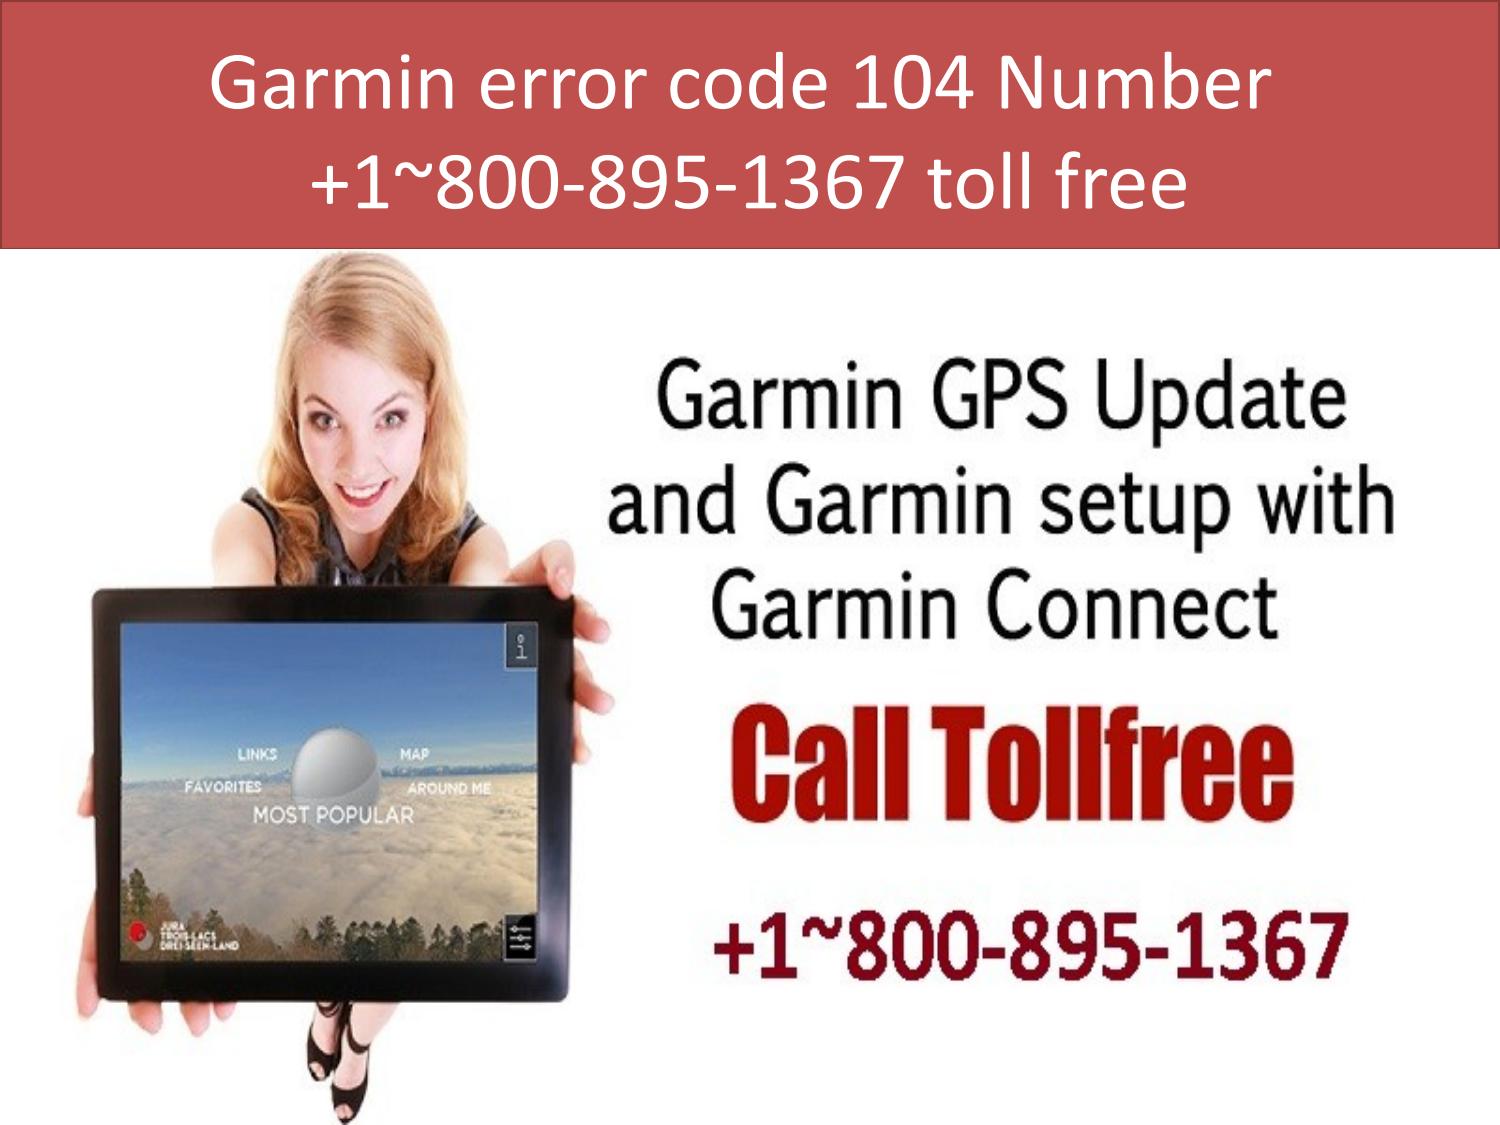 You are currently viewing Opgelost: Suggesties Om Garmin GPS-foutcodes Op Te Lossen